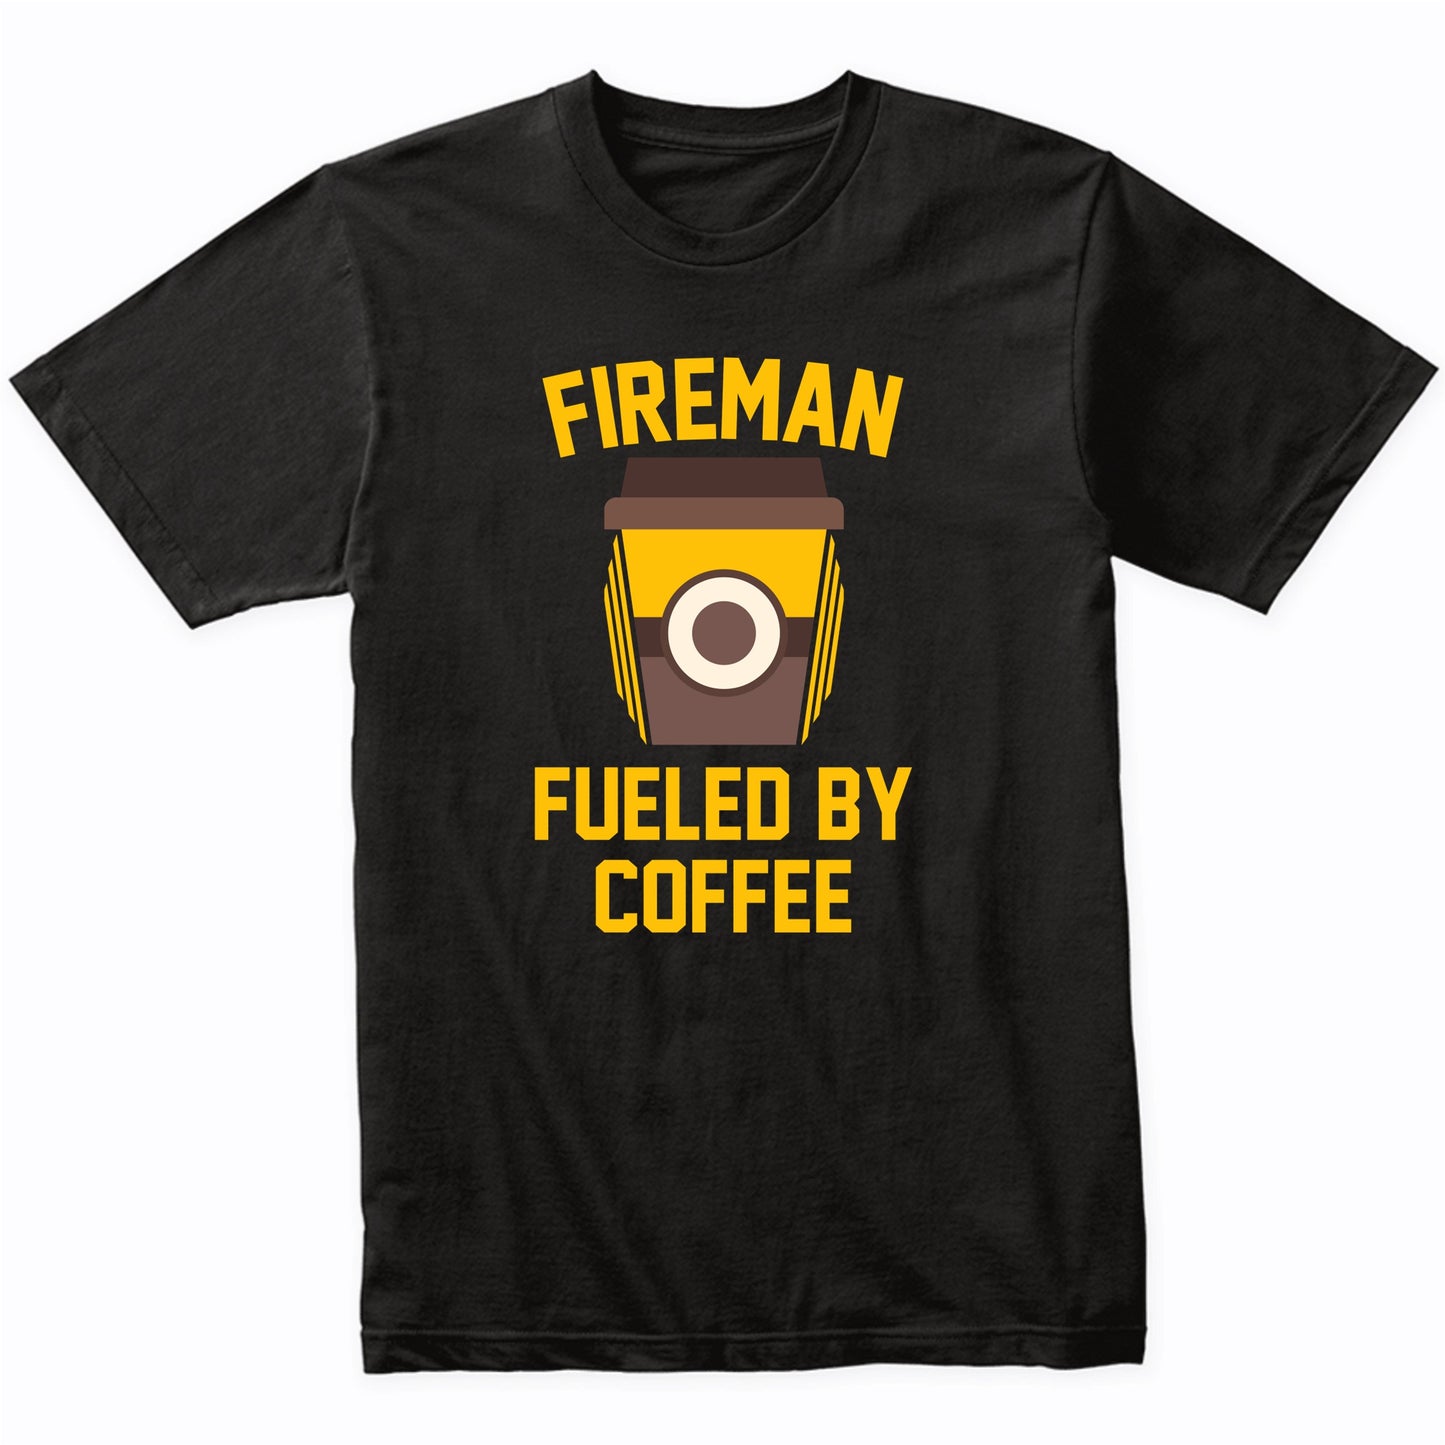 Fireman Fueled By Coffee Funny Firefighter Shirt